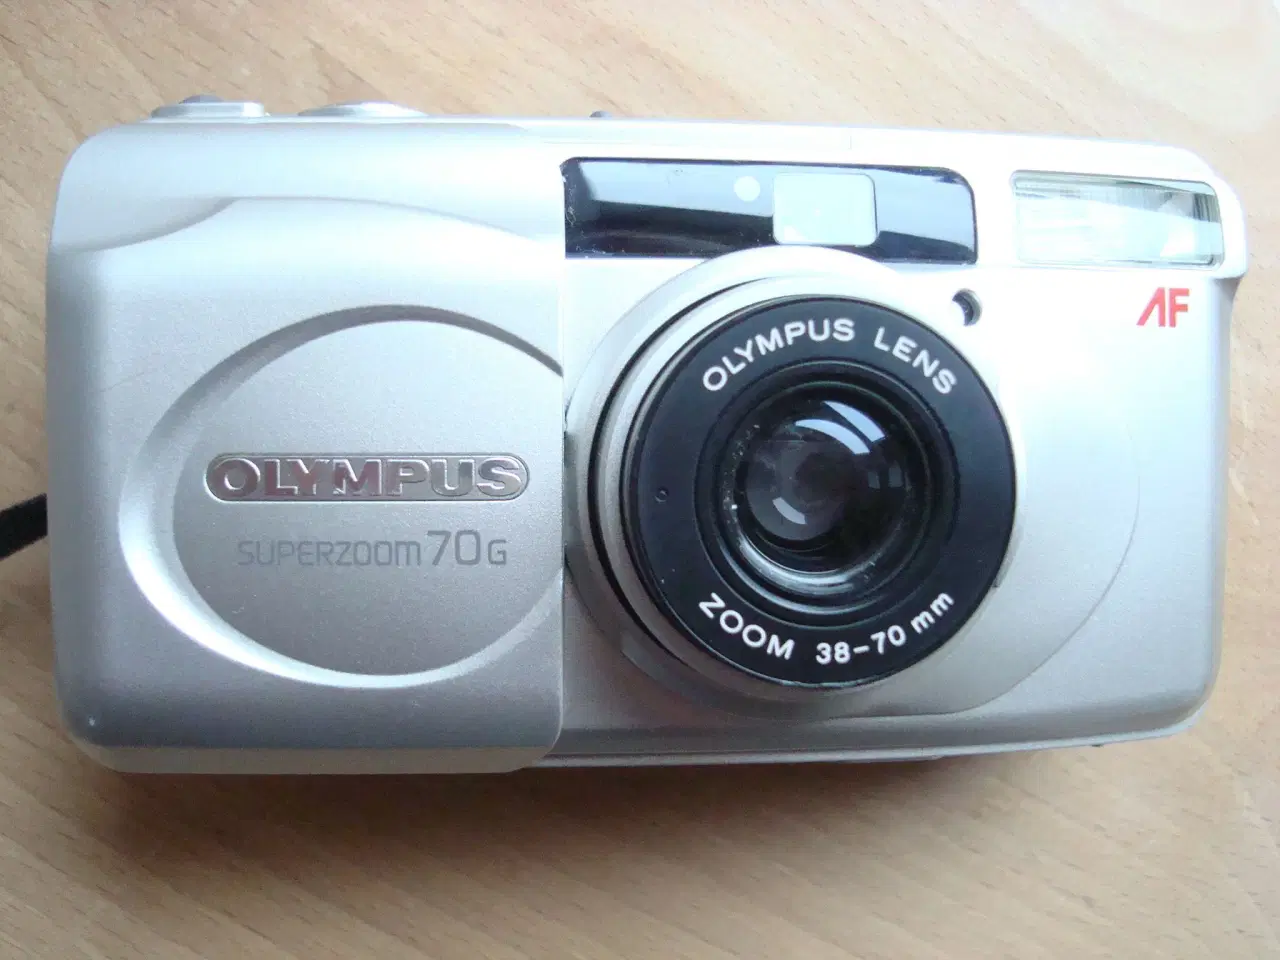 Billede 1 - Point and  shoot Olympus Superzoom 70g